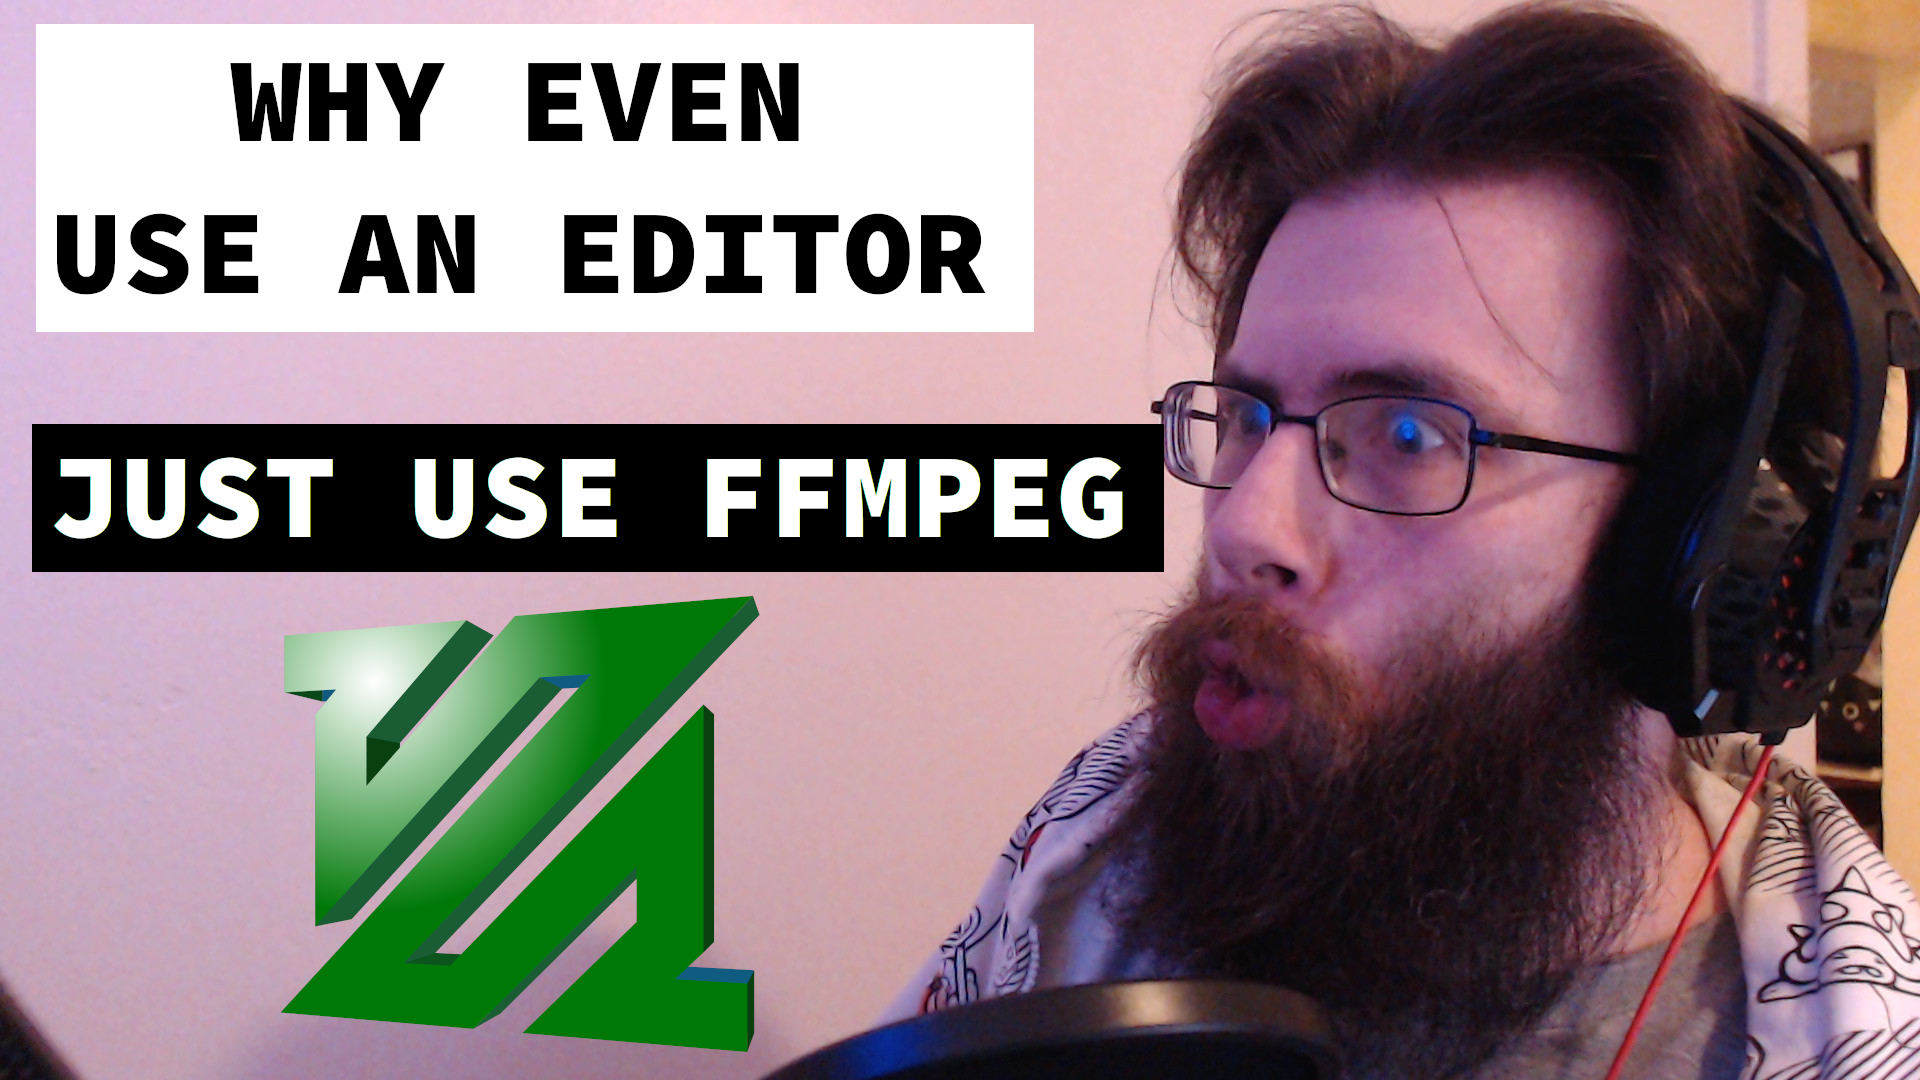 Who even needs a GUI video editor when you have FFmpeg